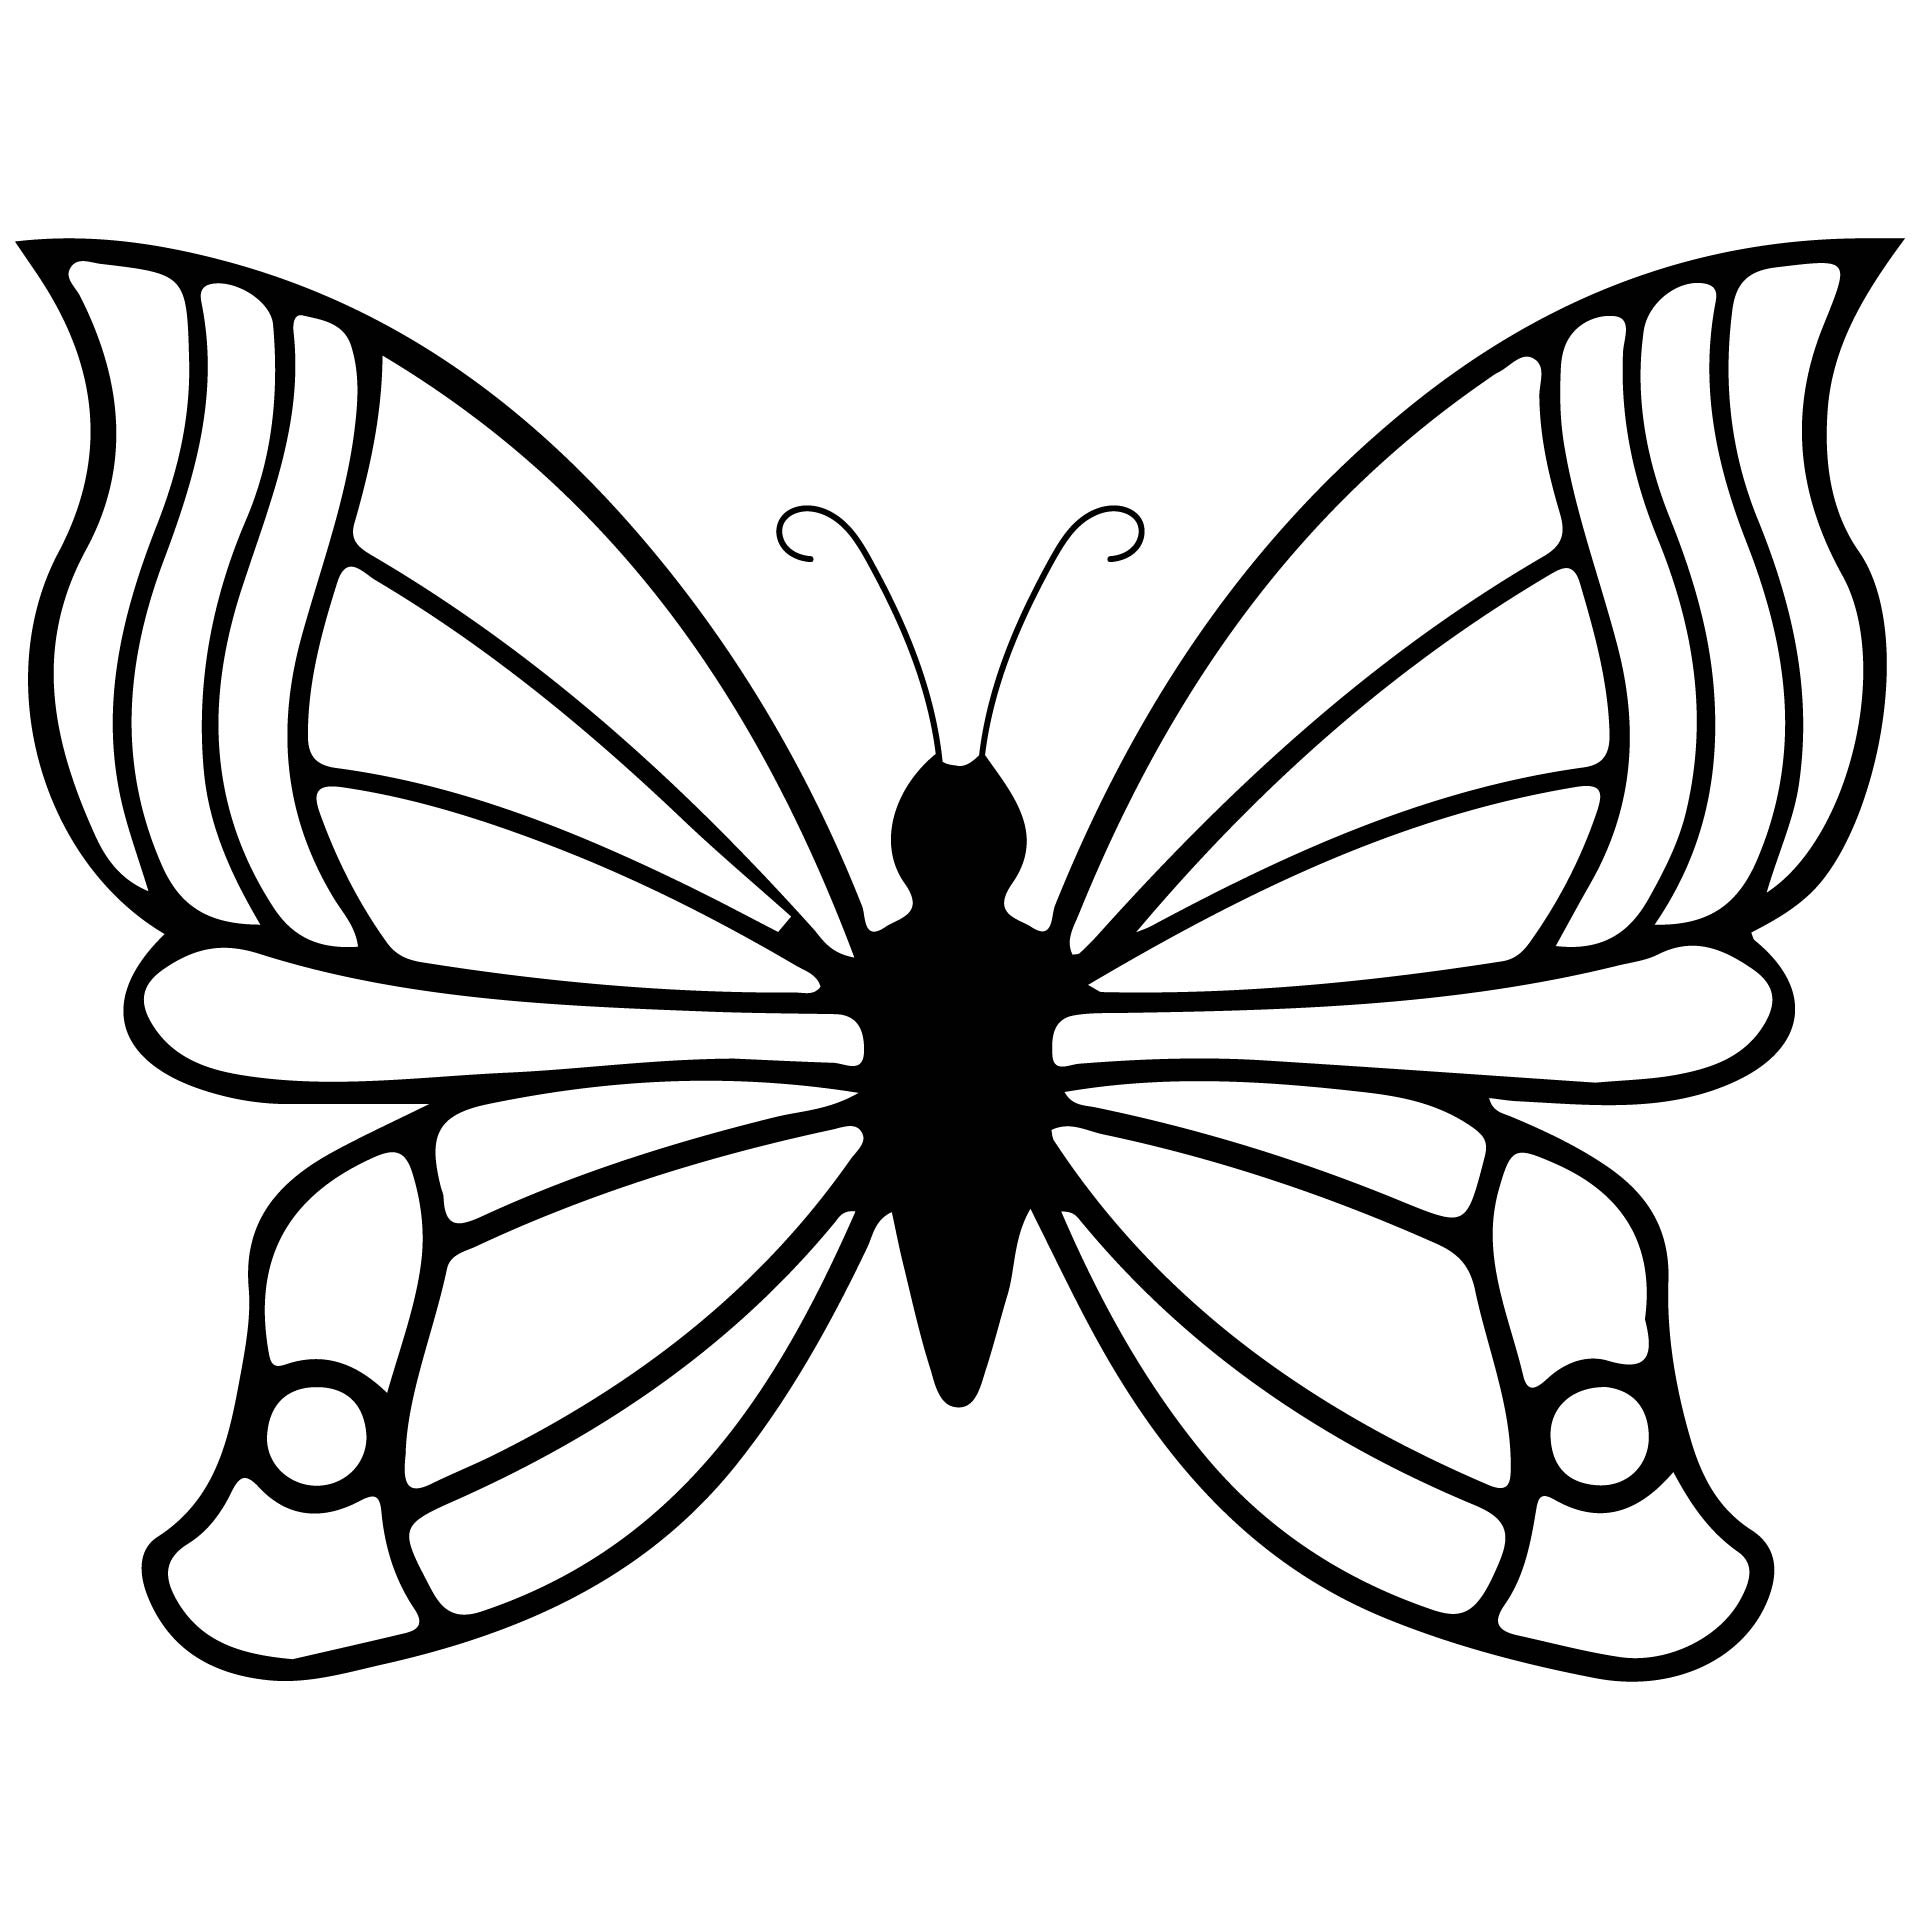 5-best-images-of-butterfly-cutouts-printables-butterfly-template